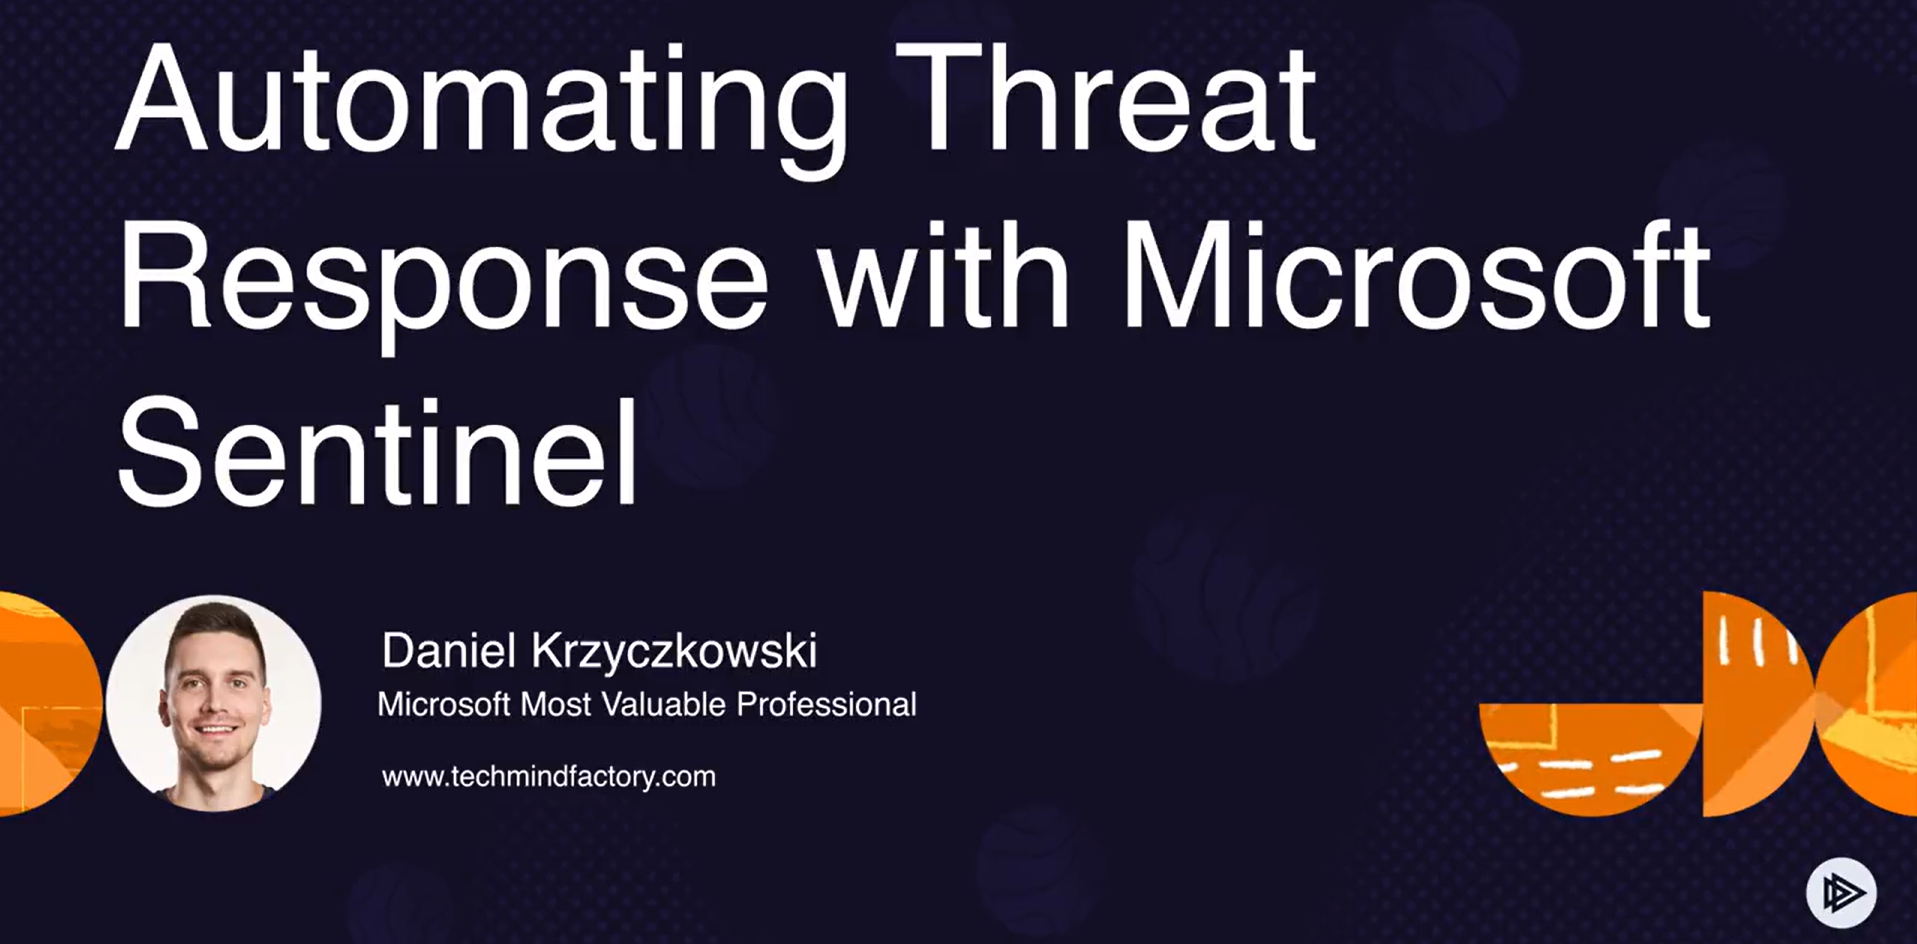 Automating Threat Response with Microsoft Sentinel